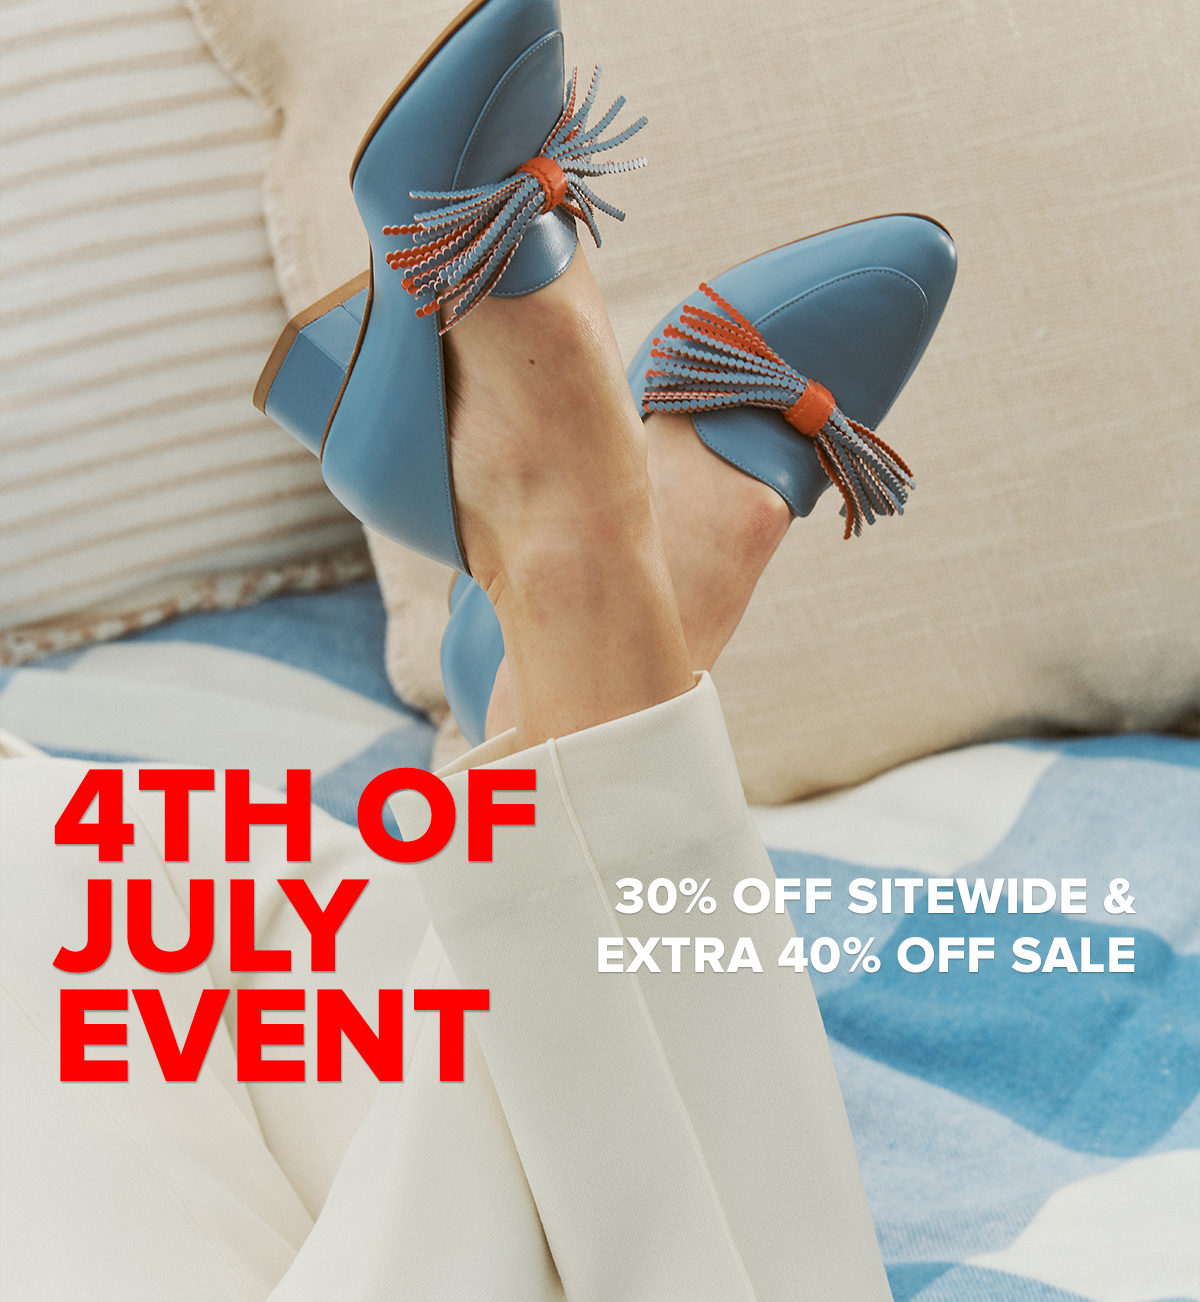 4TH OF JULY EVENT - 30% OFF SITEWIDE & EXTRA 40$ OFF SALE